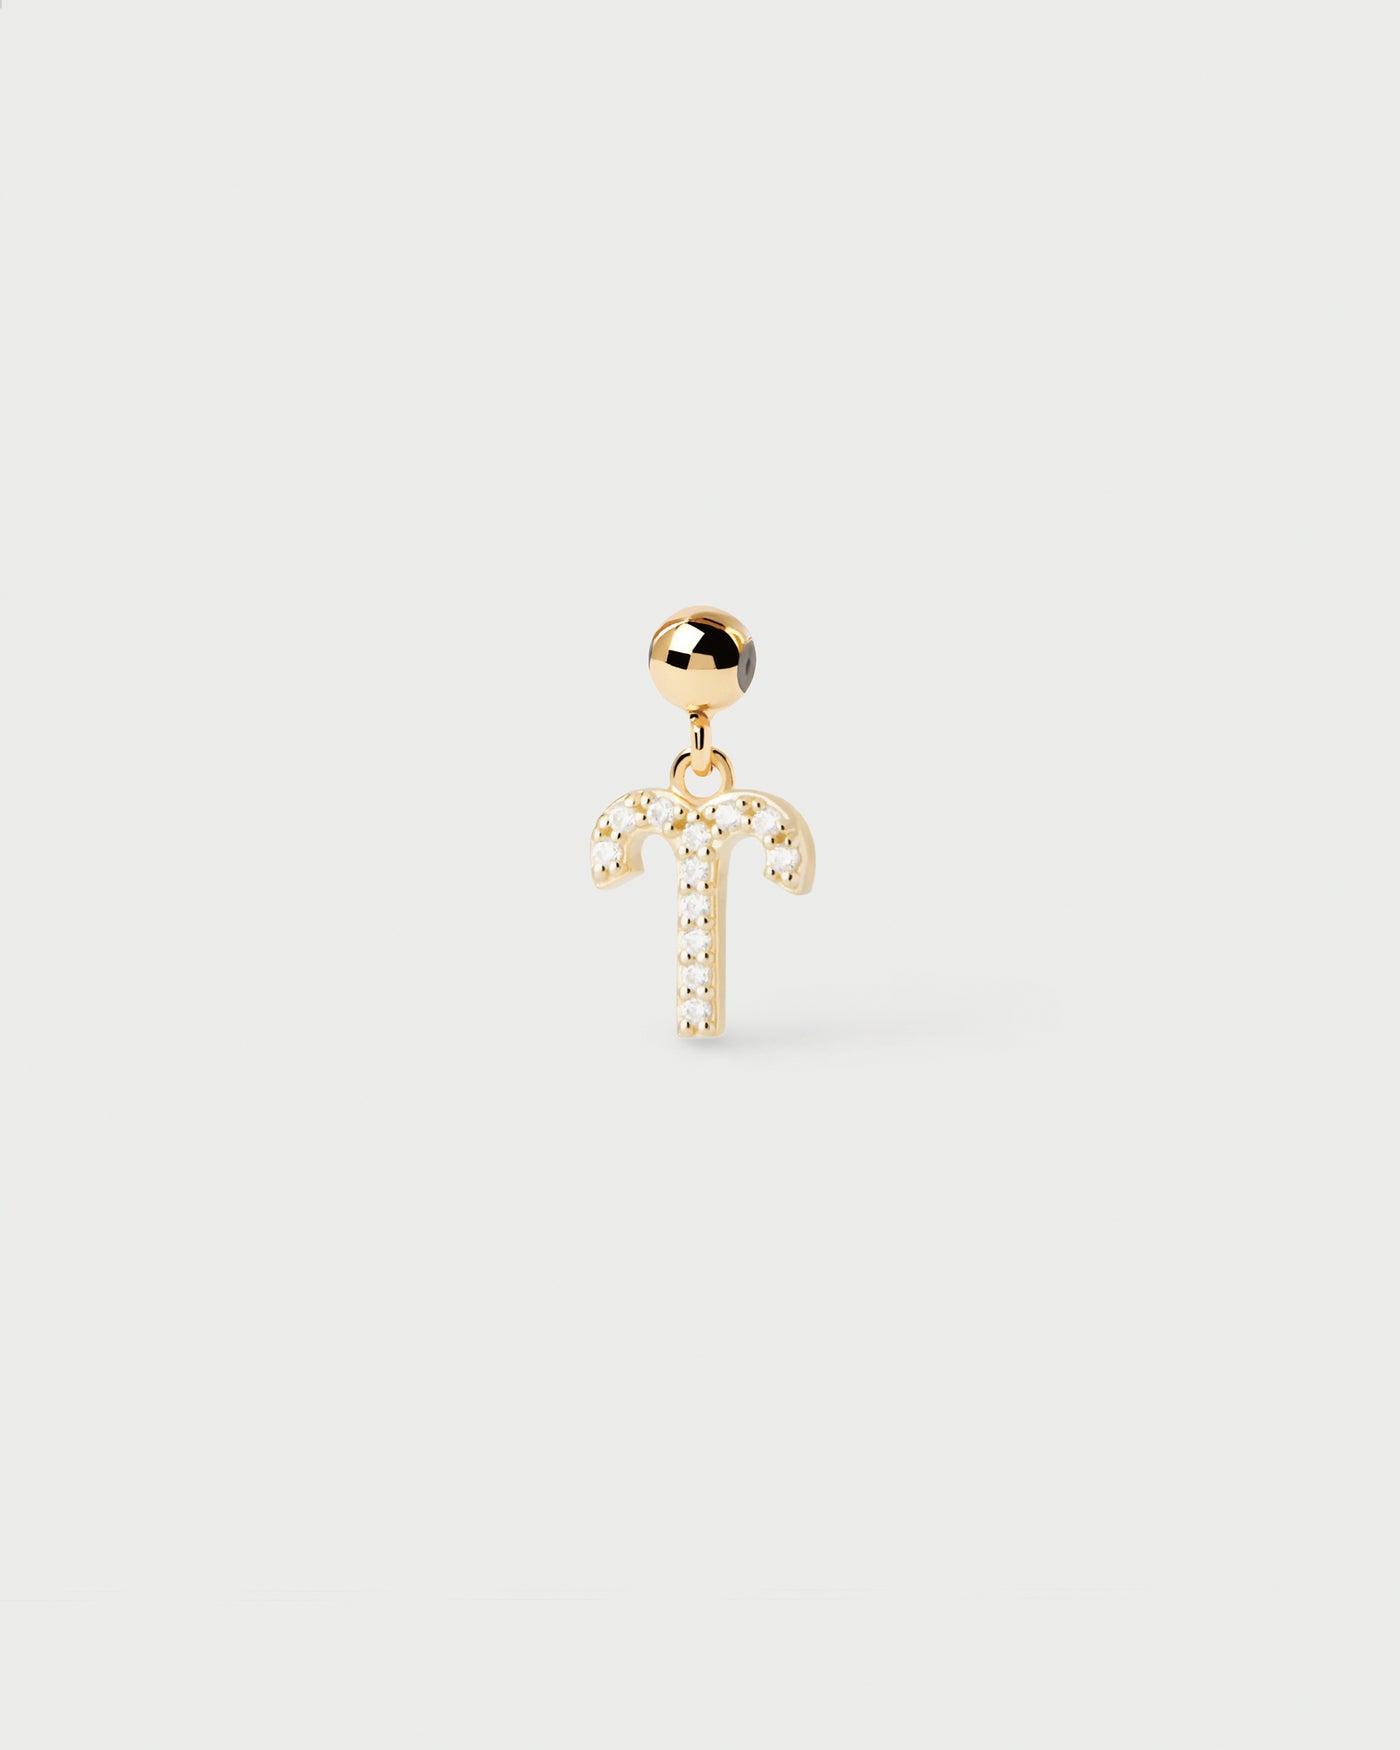 Aries Zodiac Charm Aries zodiac sign charm adorned with white zirconia to customize necklace or bracelet . Get the latest arrival from PDPAOLA. Place your order safely and get this Best Seller. Free Shipping.